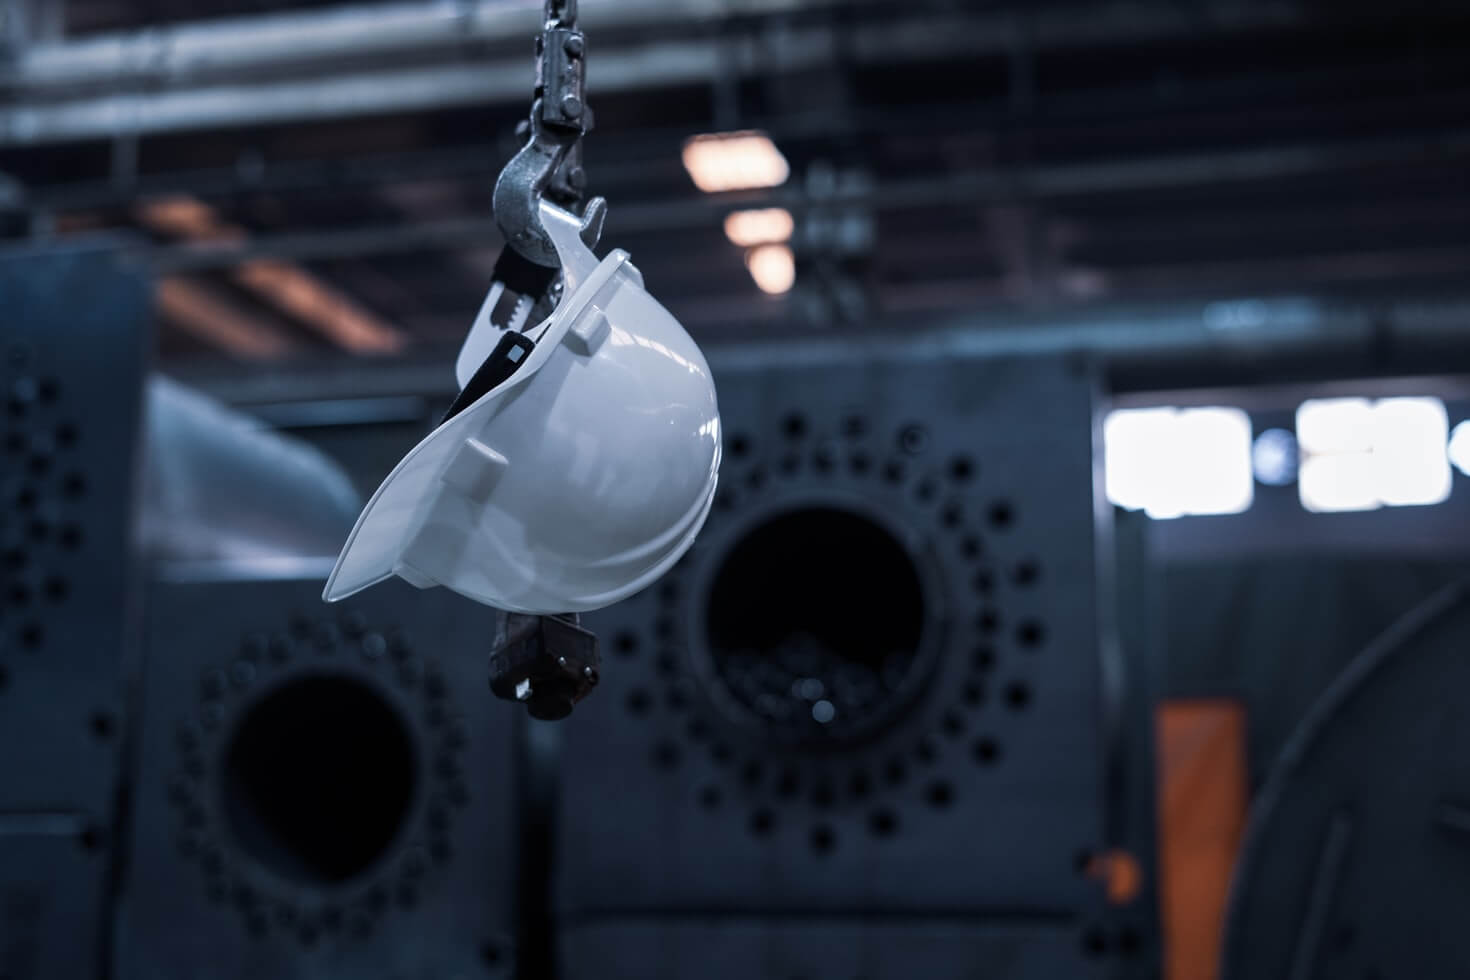 Construction safety helmet hanging from a hook